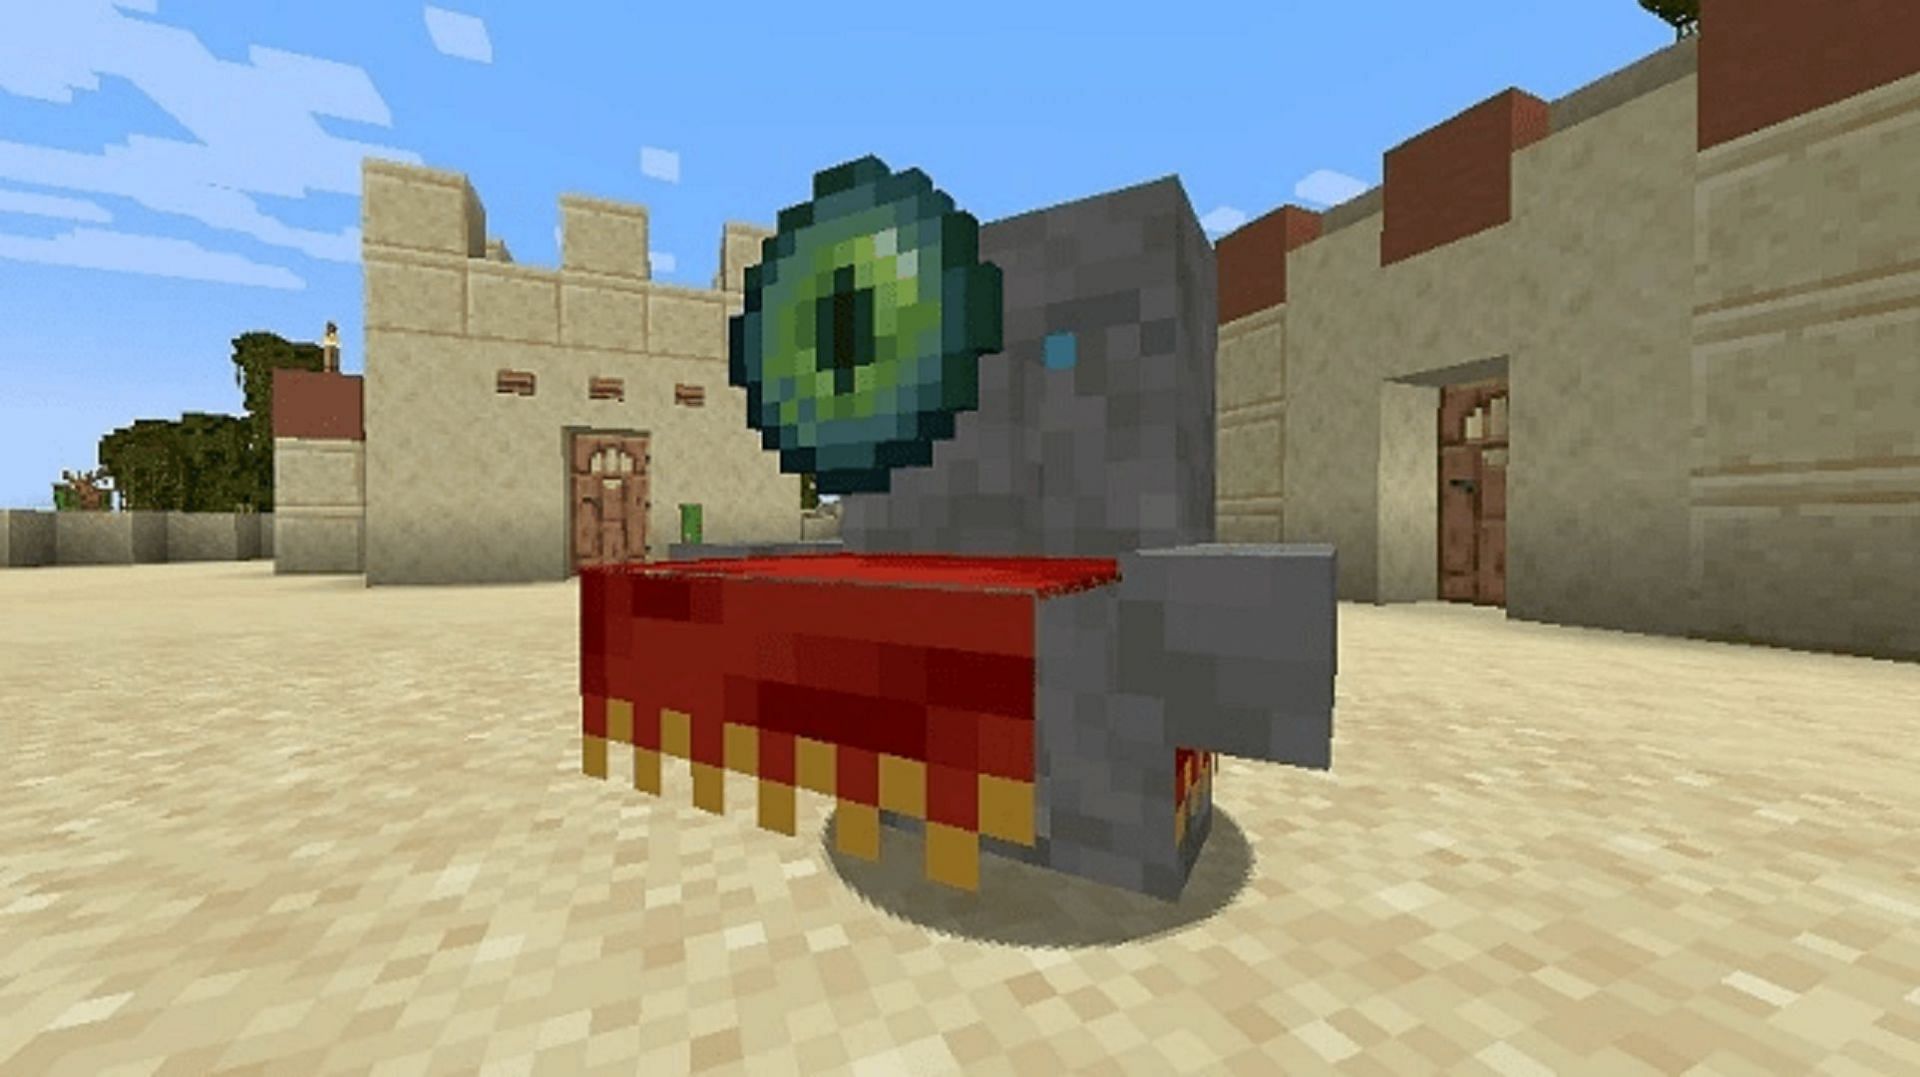 The Tuff Golem carries an Ender Peal and displays it (Image via Mojang)